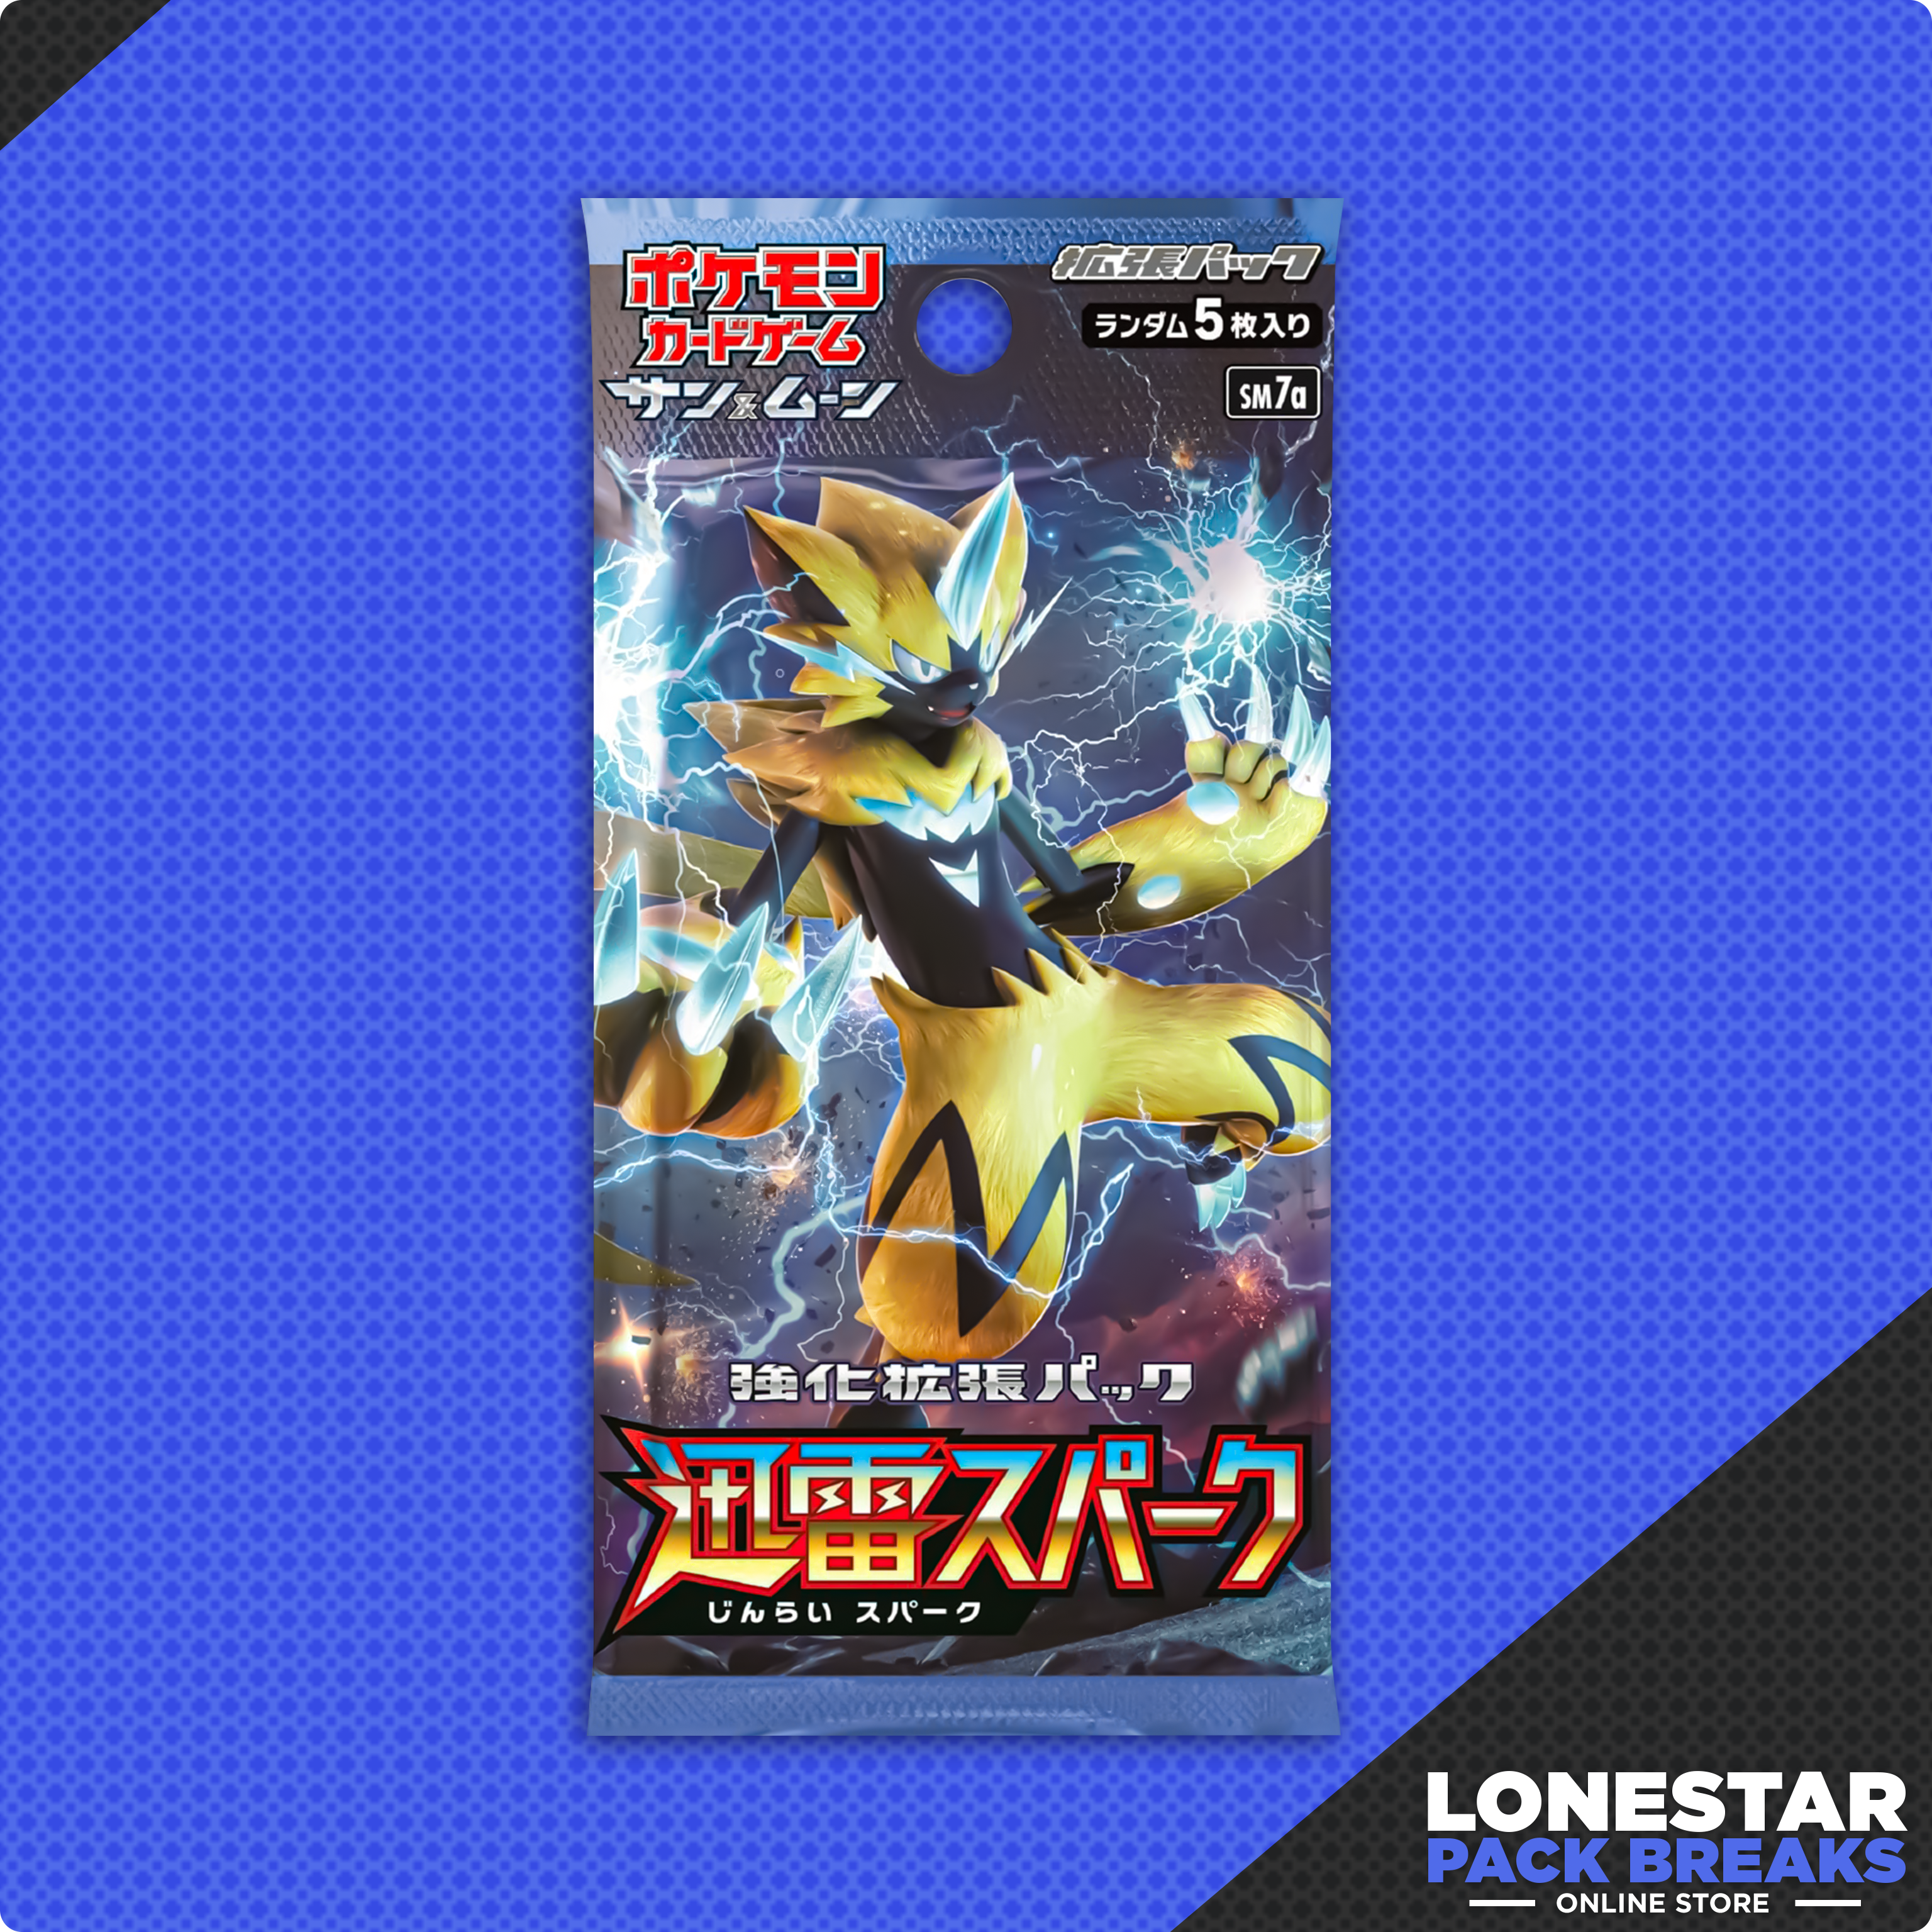 Thunderclap Spark SM7a Booster Pack-Japanese